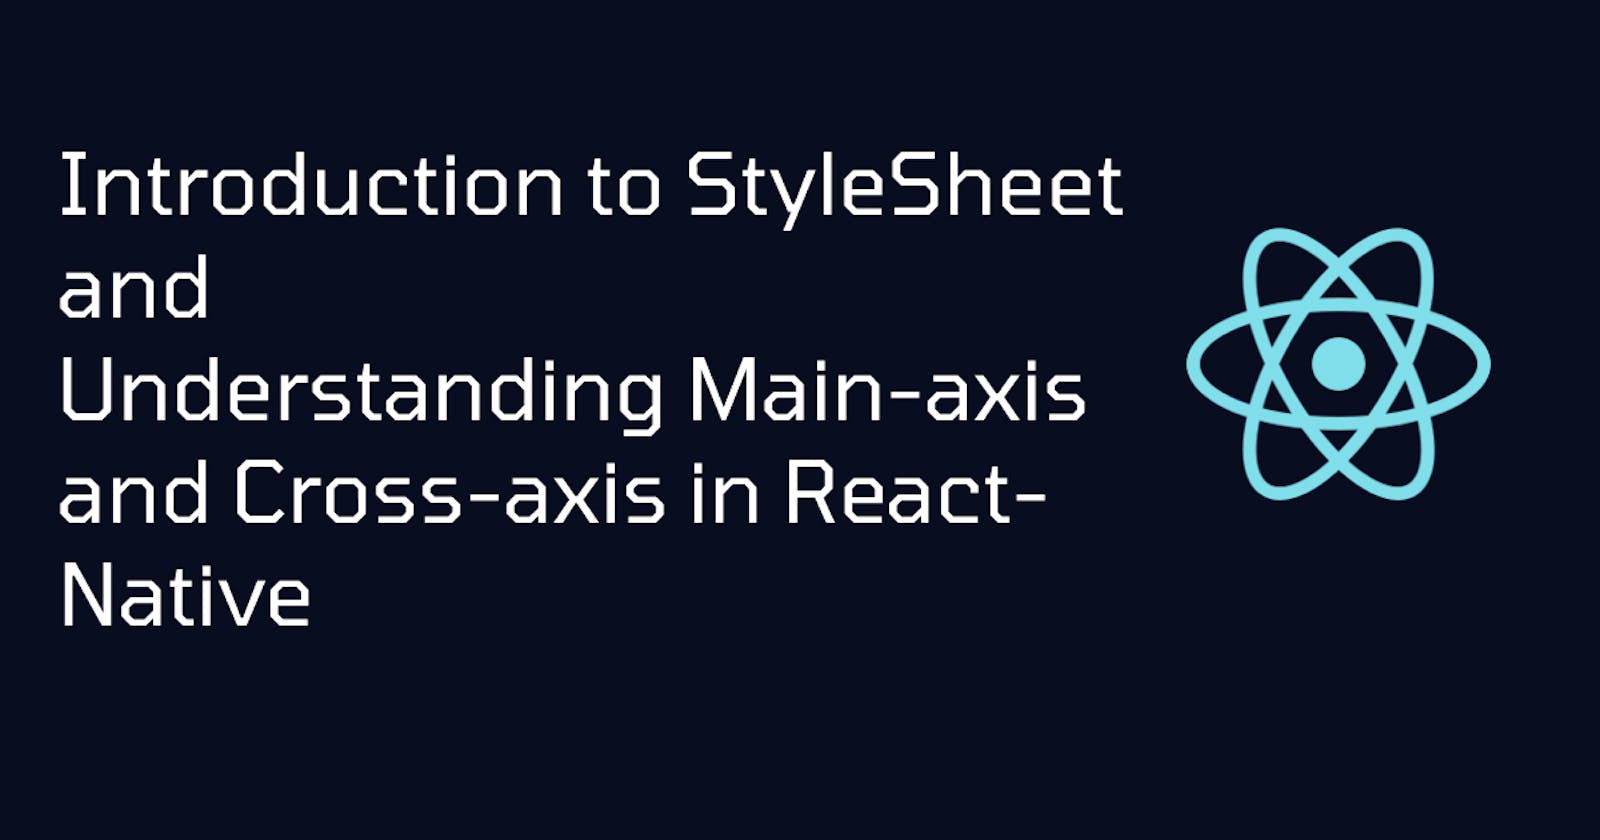 Introduction to StyleSheet and Understanding Main-axis and Cross-axis in React-Native